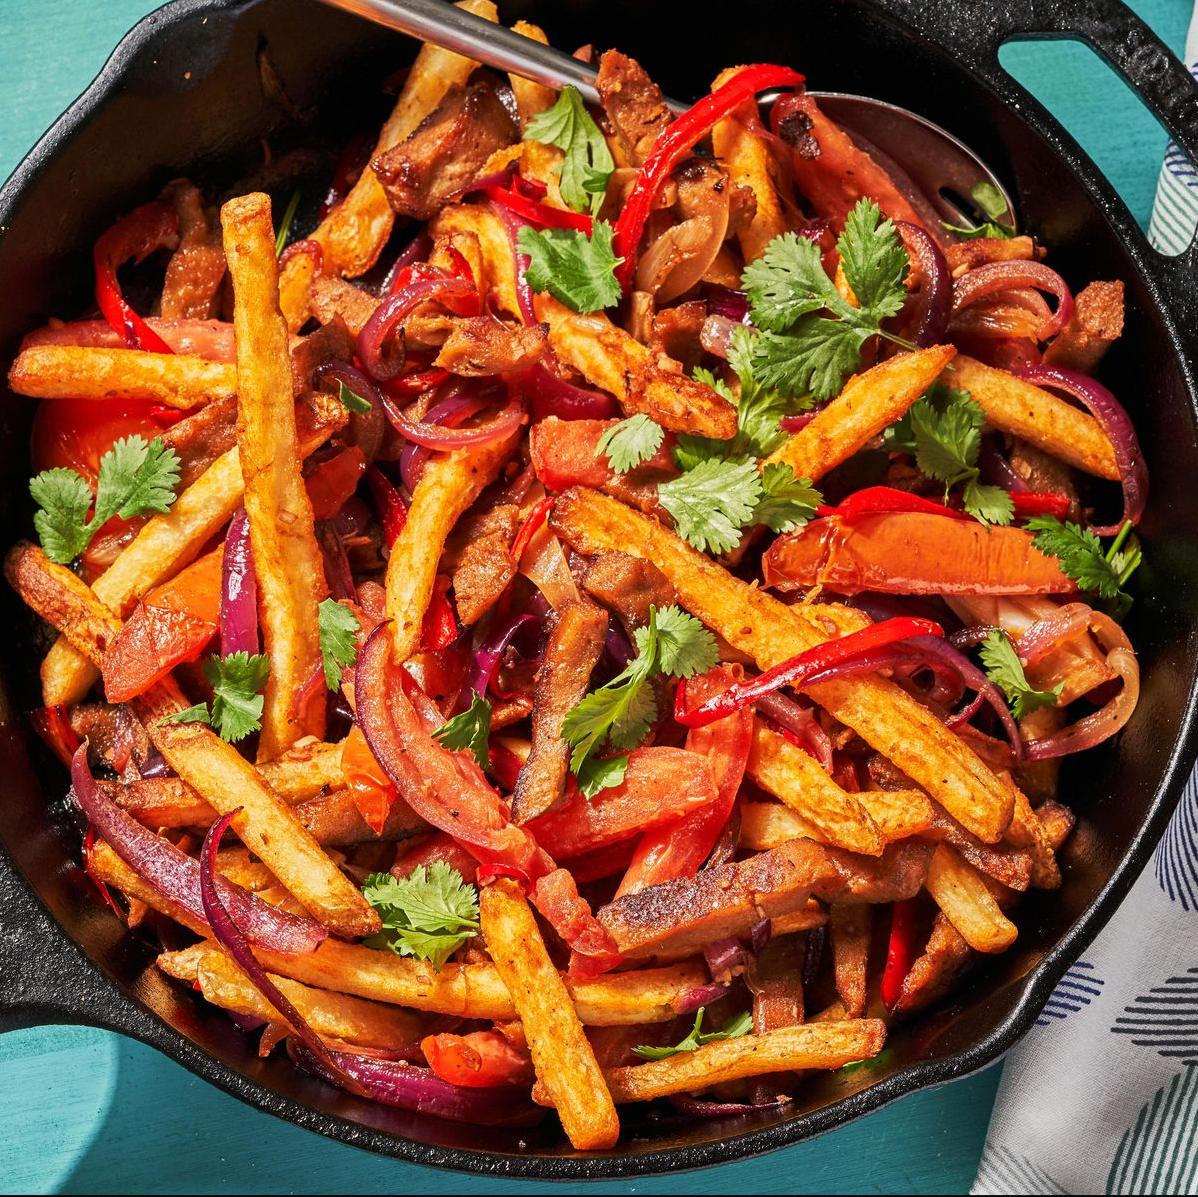  Colorful and delicious, this vegetarian dish is sure to become a favorite.